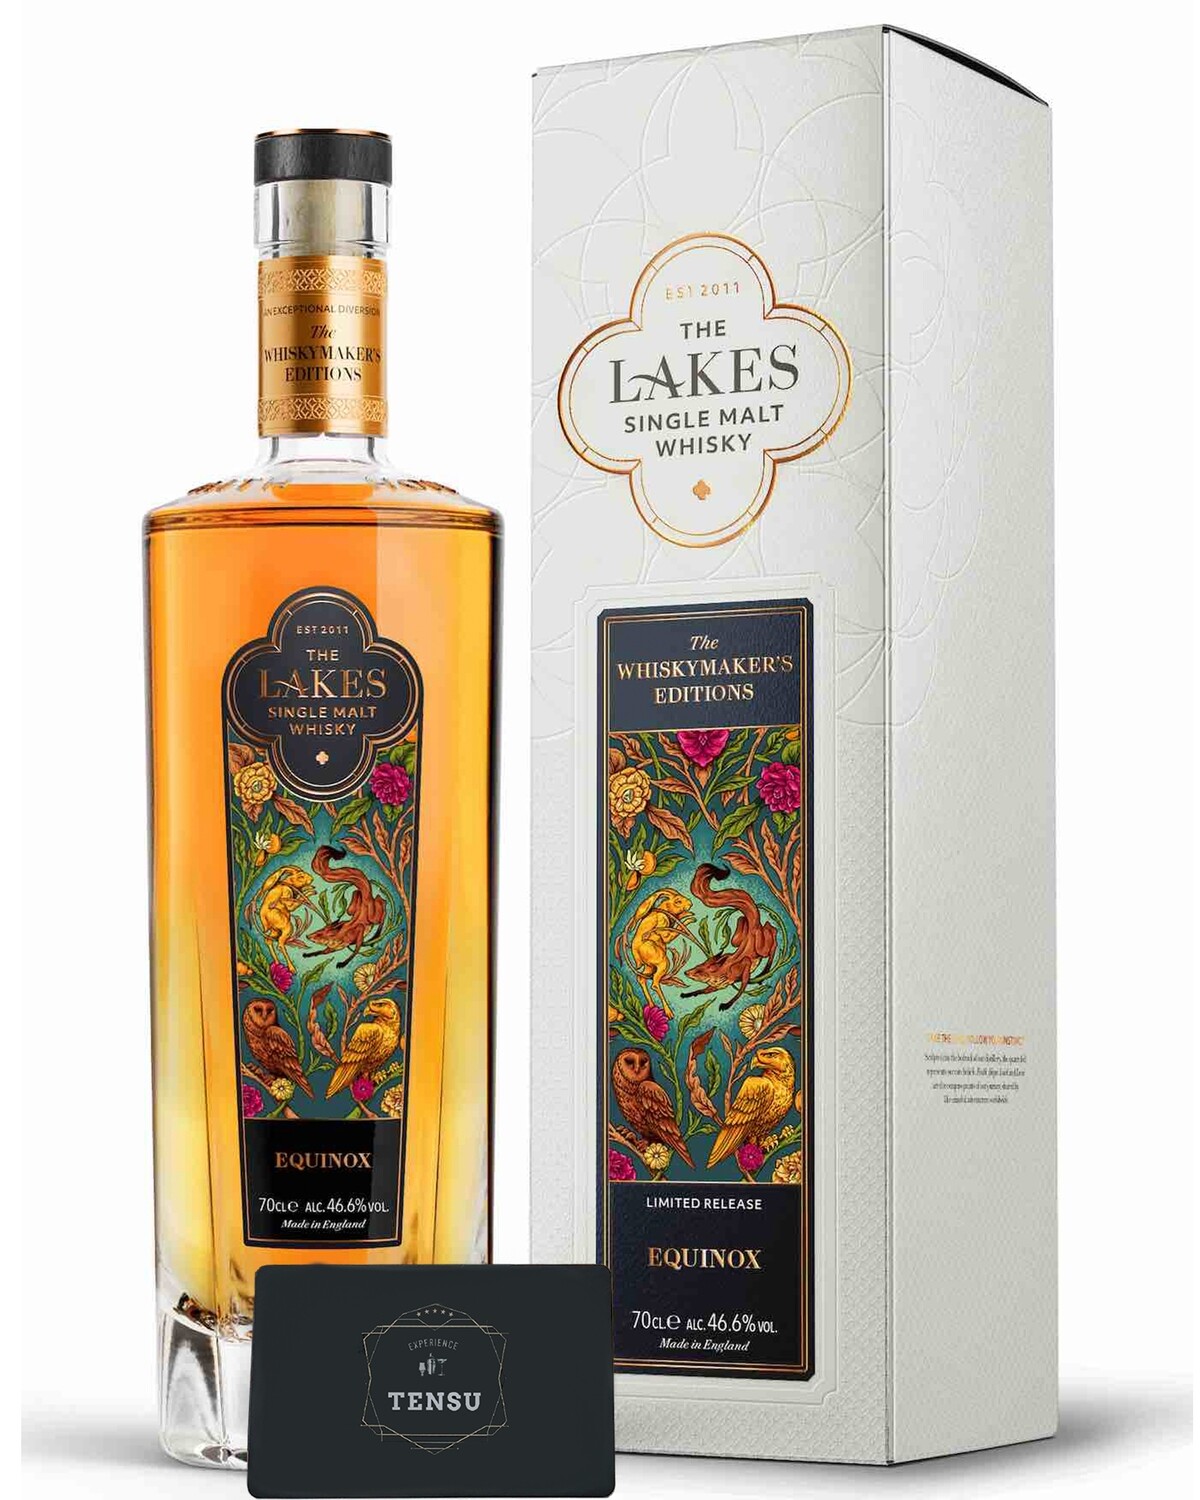 The Lakes - The Whiskymaker's Editions - Equinox 46.6 "The Lakes Distillery"